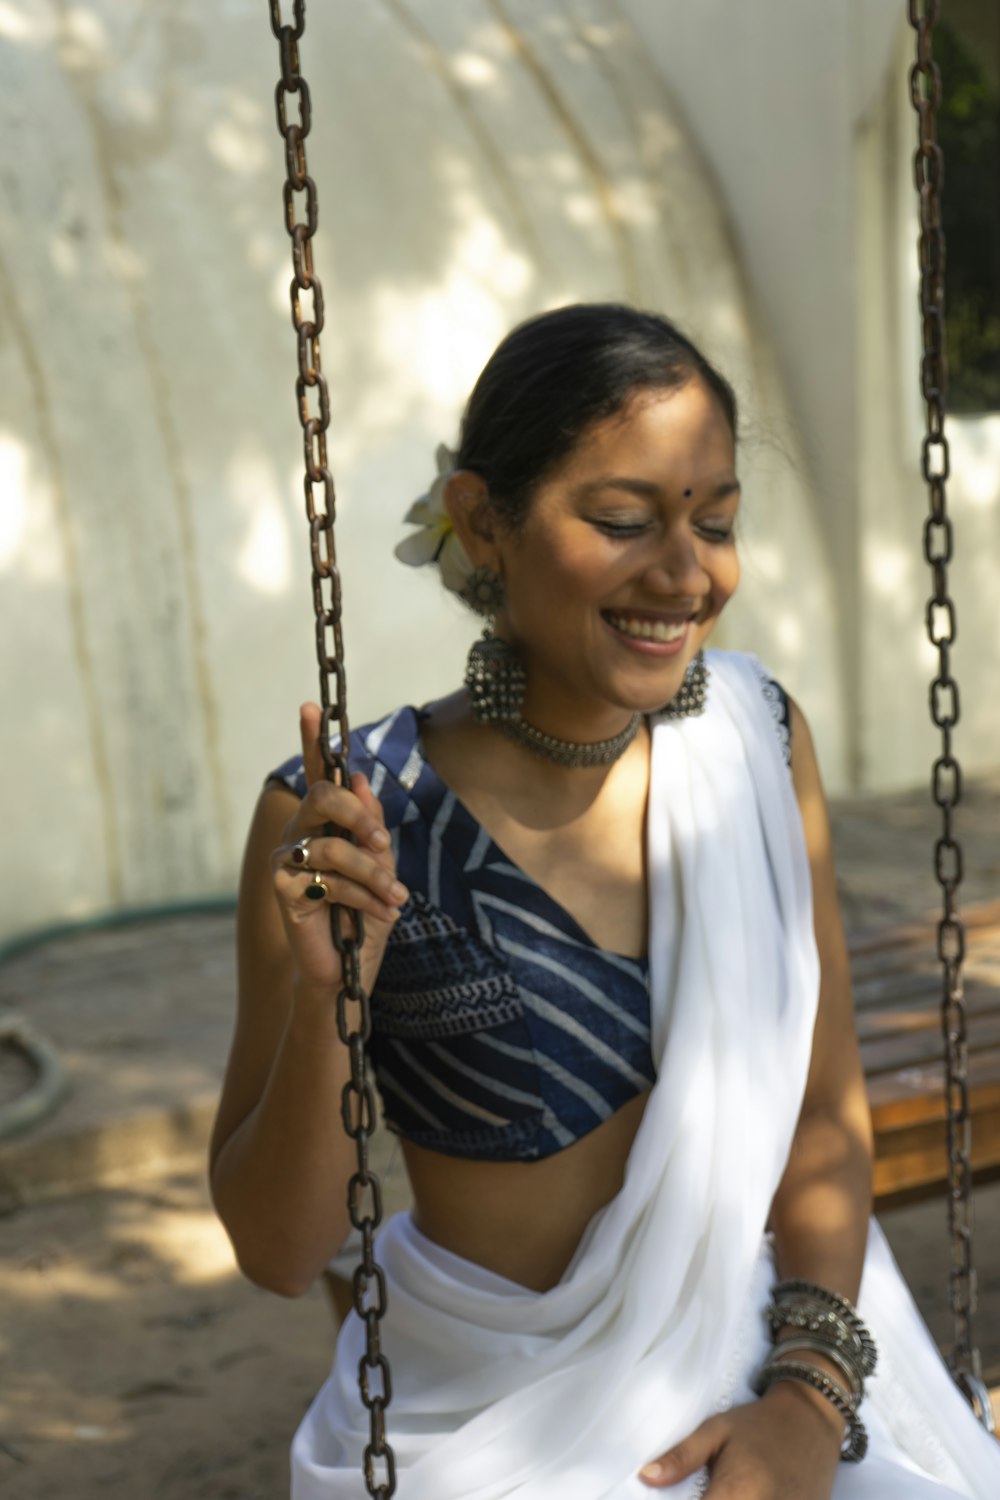 a woman in a white sari sitting on a swing